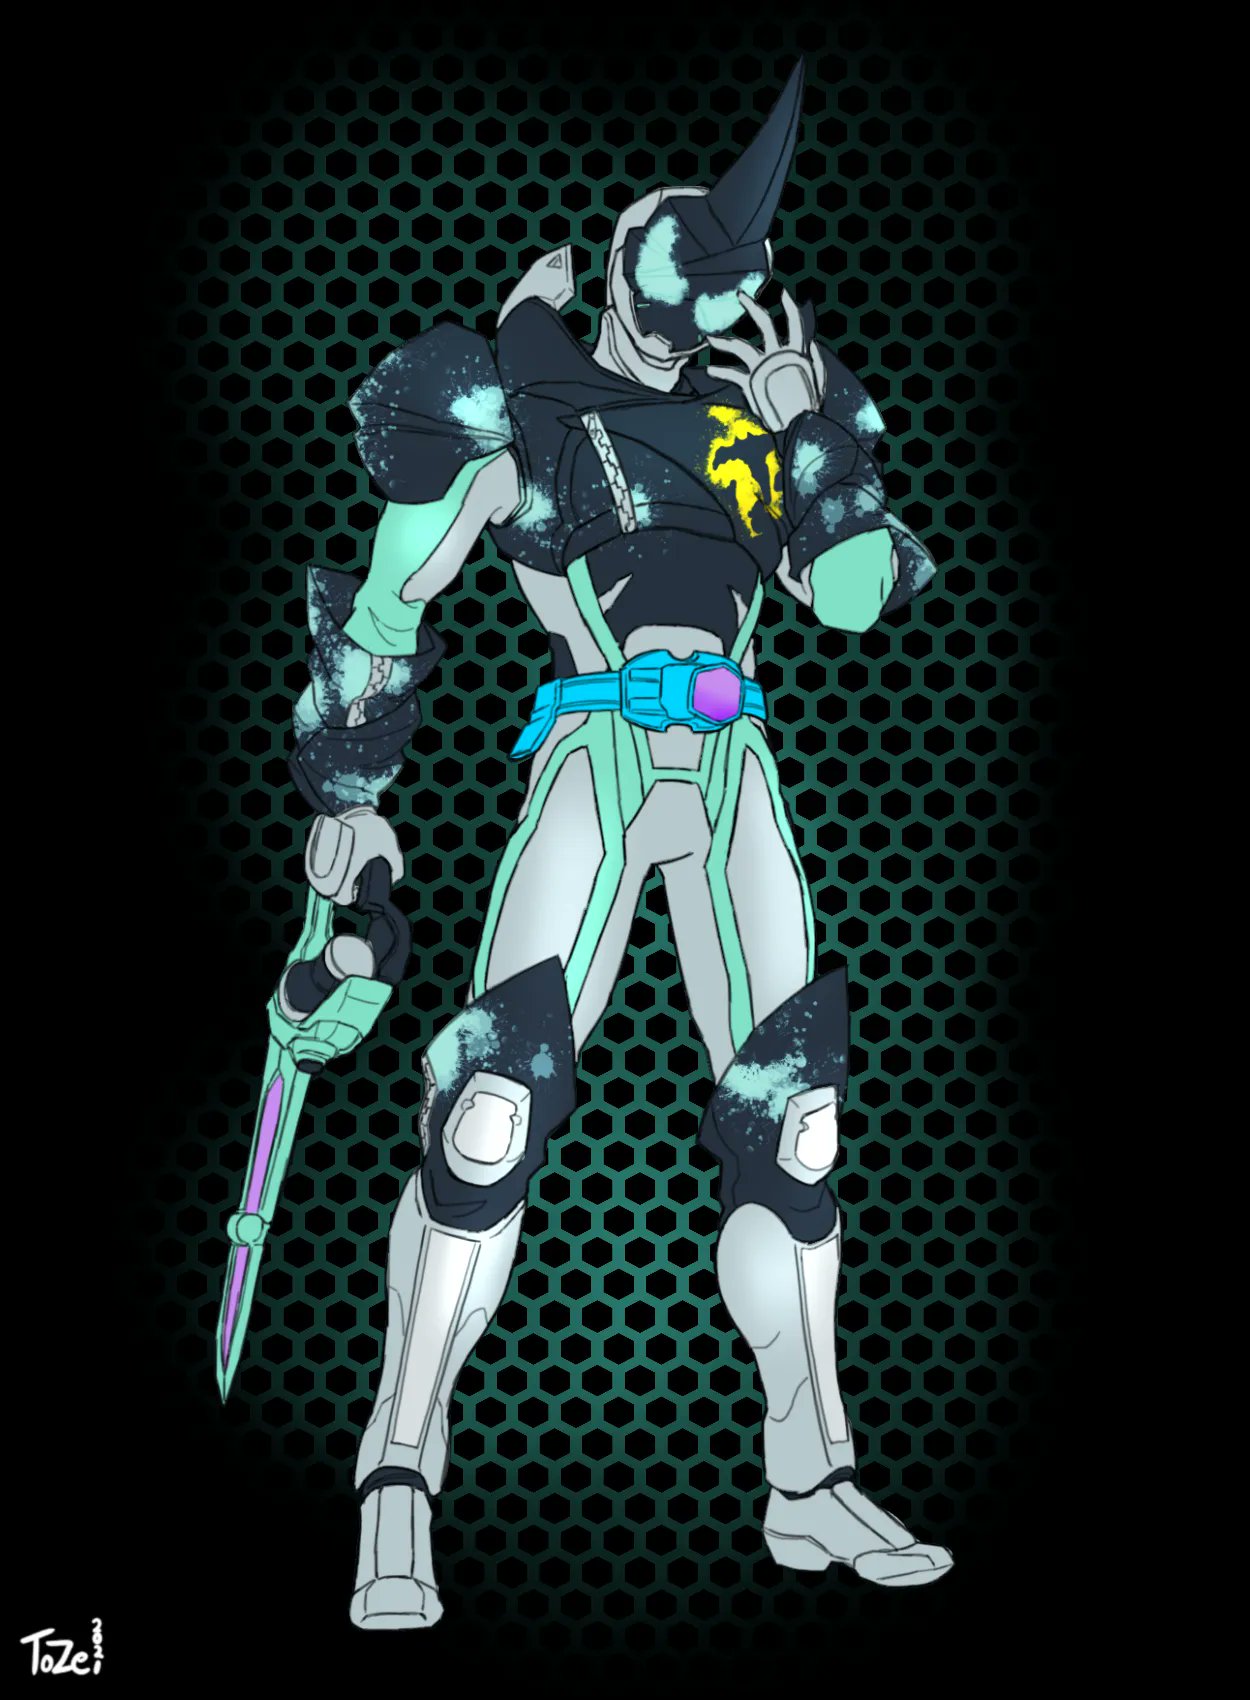 1boy armor bat black_armor boots driver evil flat_color gloves grey_gloves highres holding holding_weapon kamen_rider kamen_rider_evil kamen_rider_revice male_focus open_hand rider_belt spiked_helmet spray_paint sword to_ze two-tone_footwear villain_pose weapon zipper zipper_pull_tab